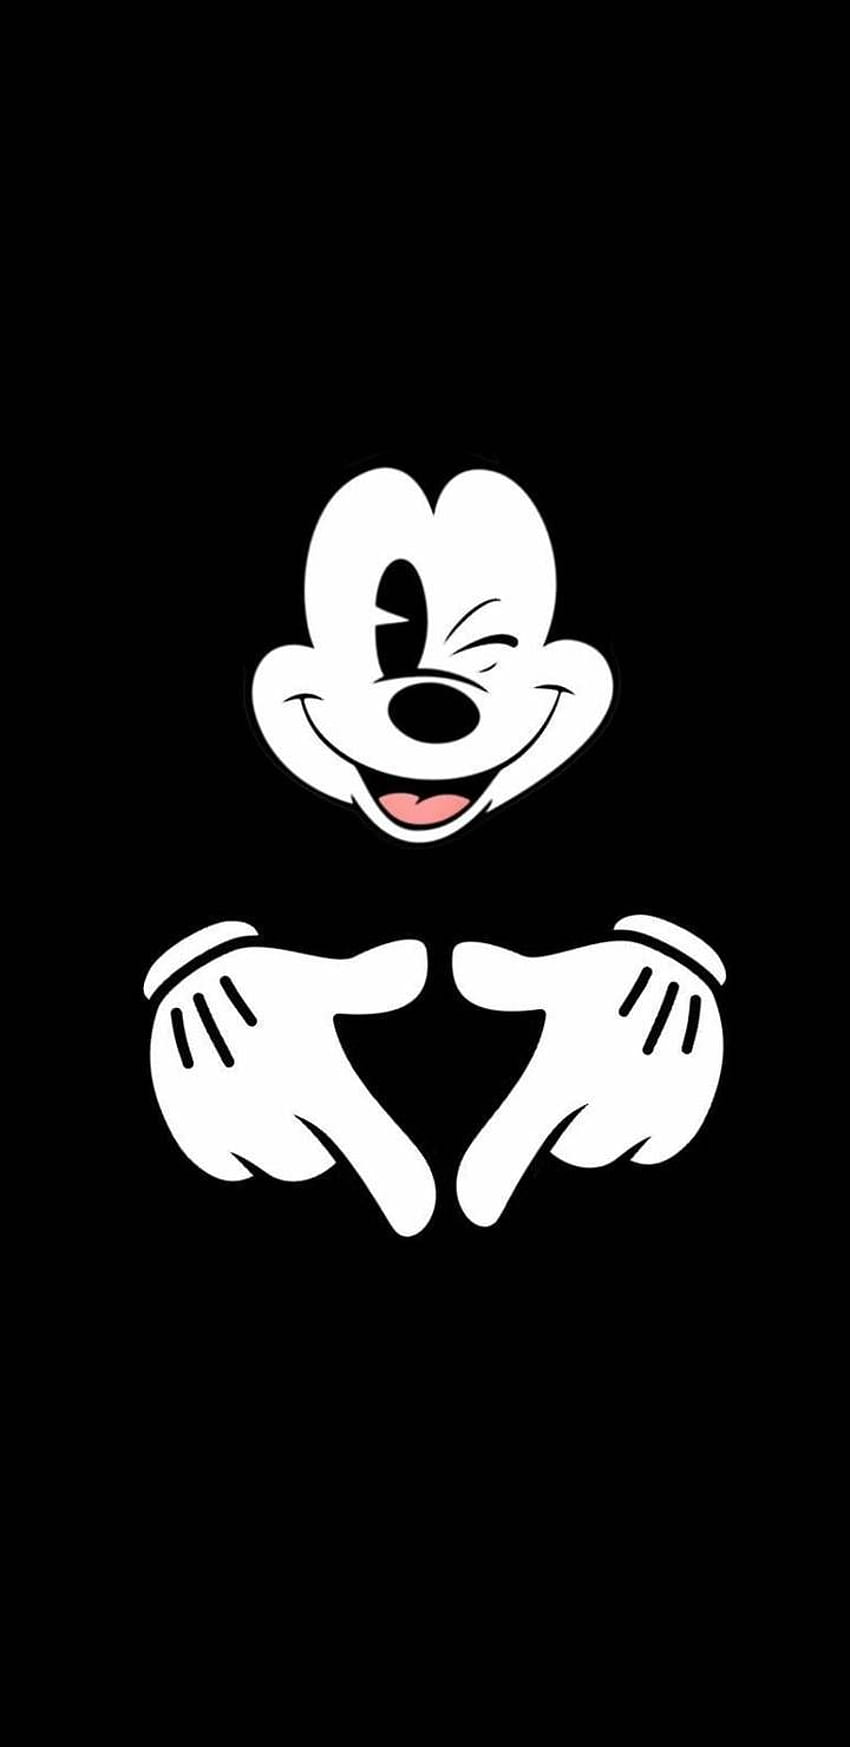 Mickey Mouse iPhone - , Latar Belakang iPhone Mickey Mouse di Kelelawar, Minnie Mouse Hitam wallpaper ponsel HD